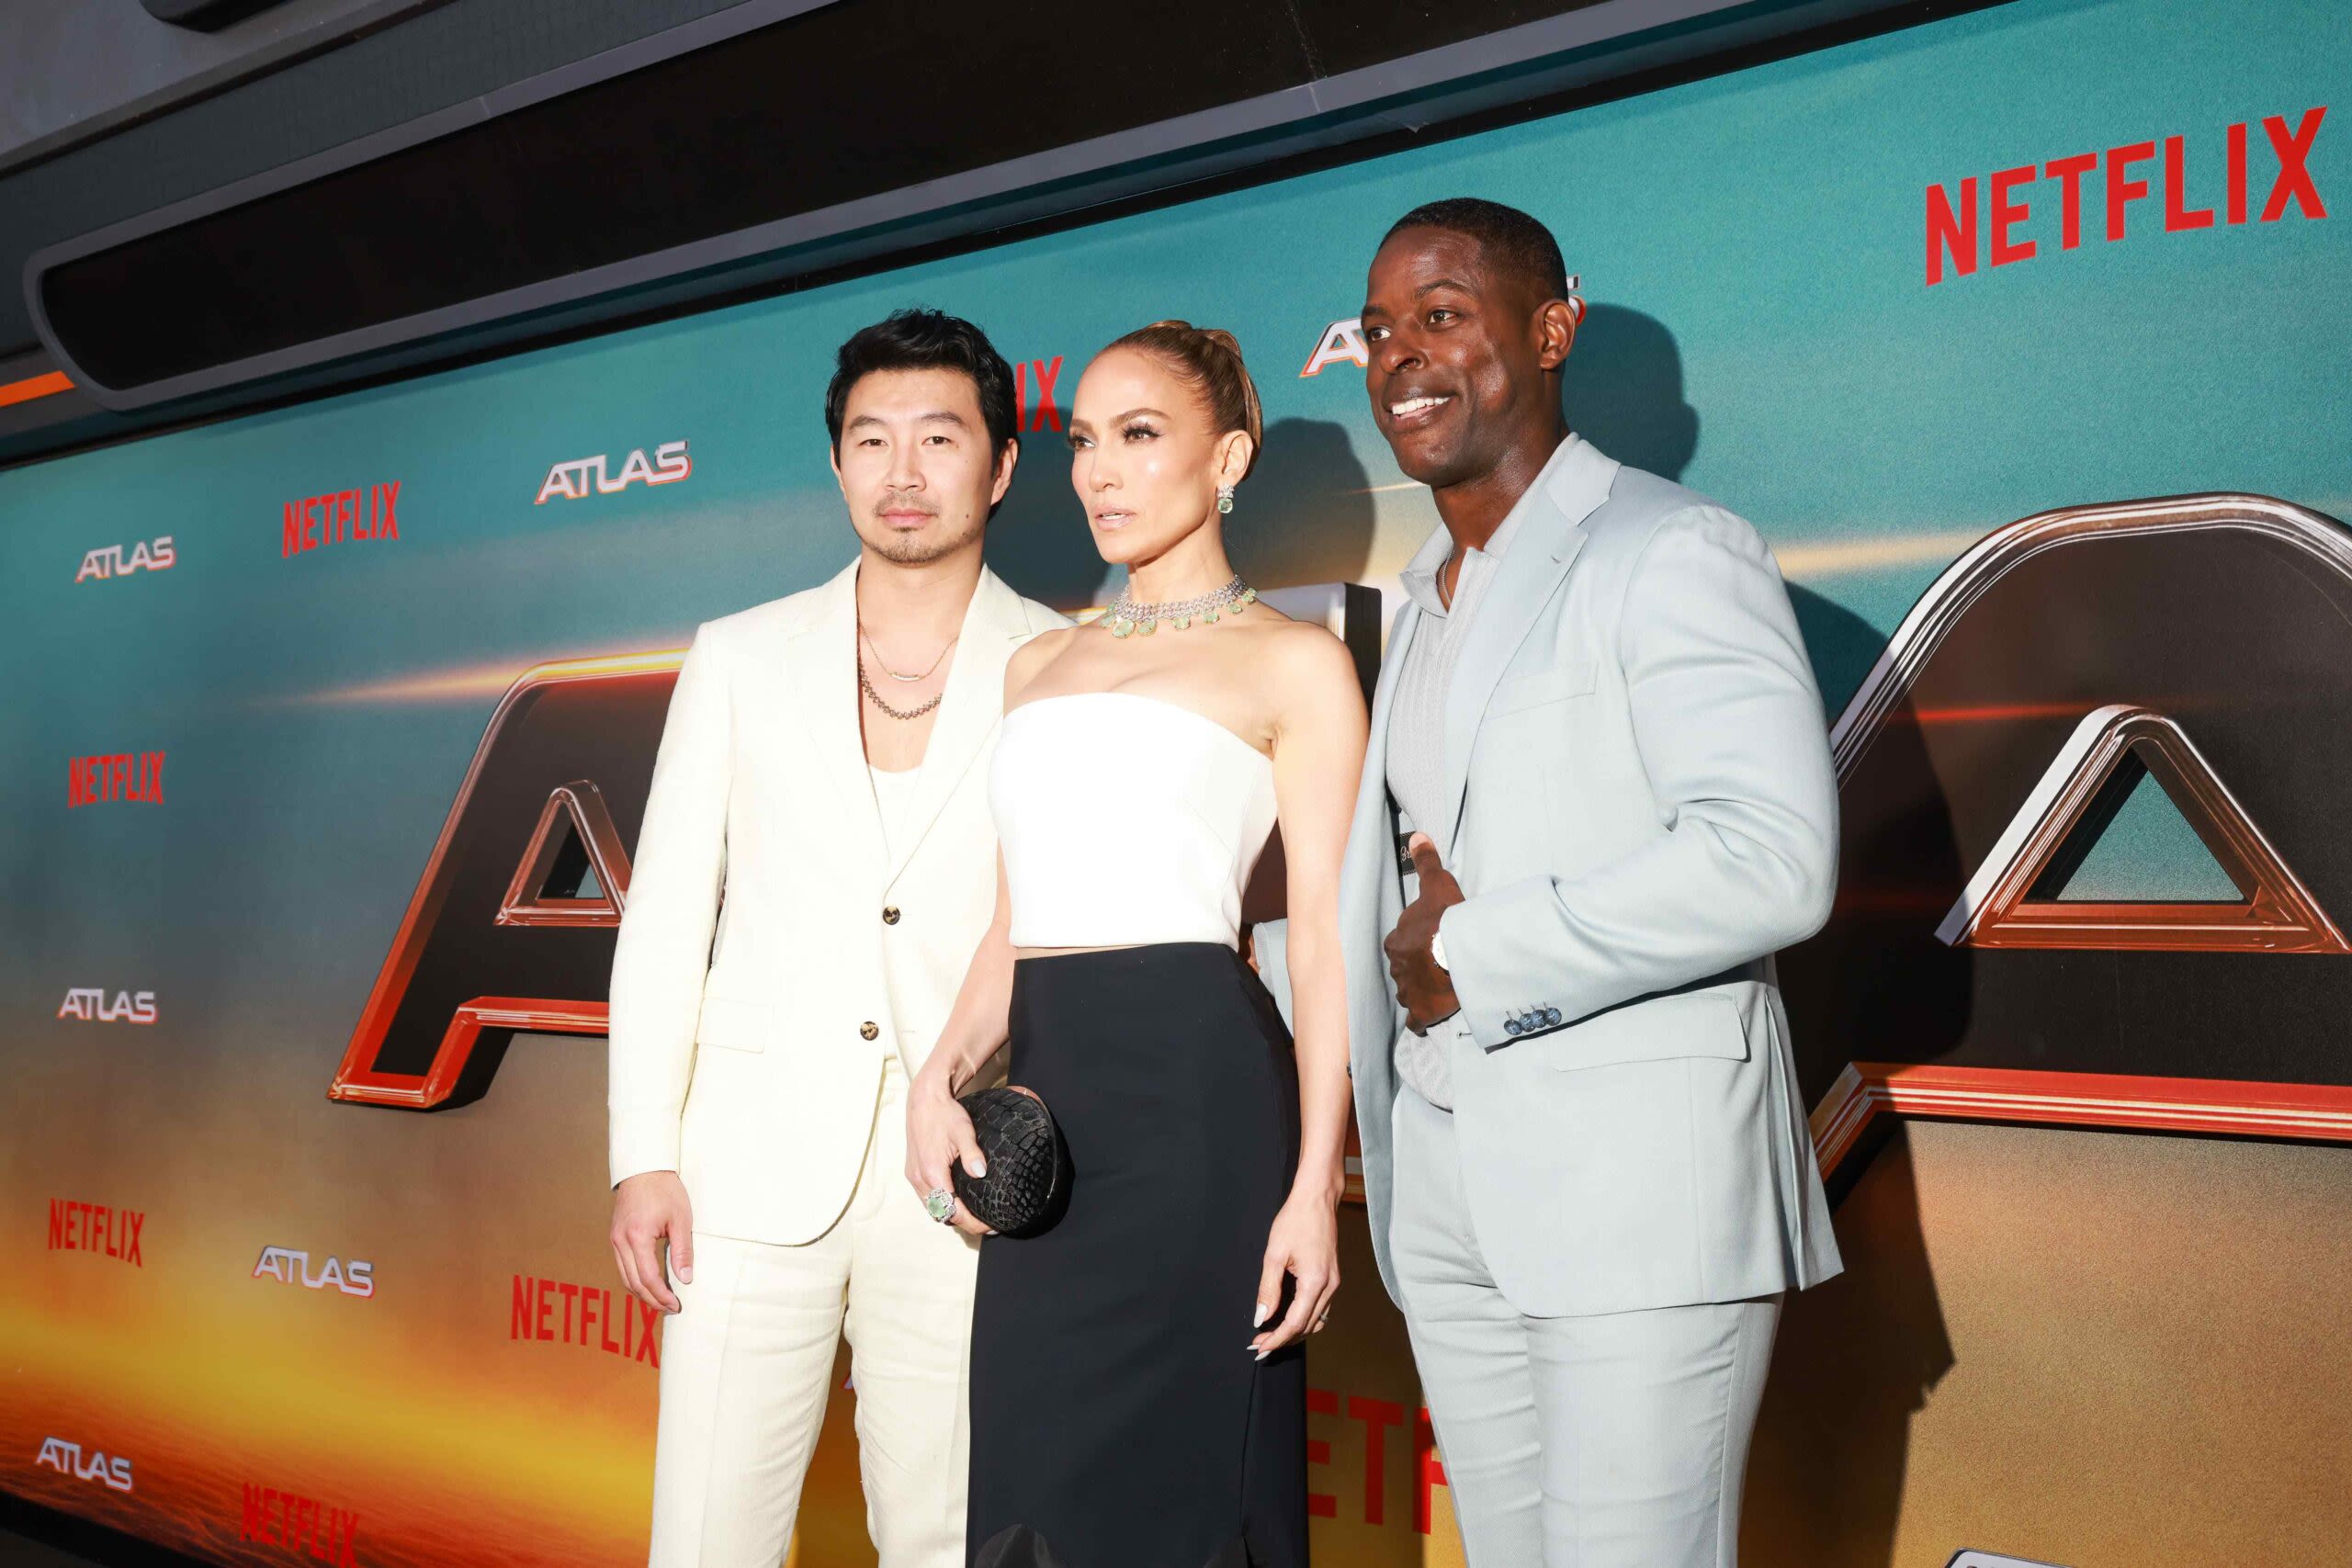 ‘Atlas’ Stars Jennifer Lopez, Sterling K. Brown And Simu Liu On Humanity And Interconnectivity In The Film